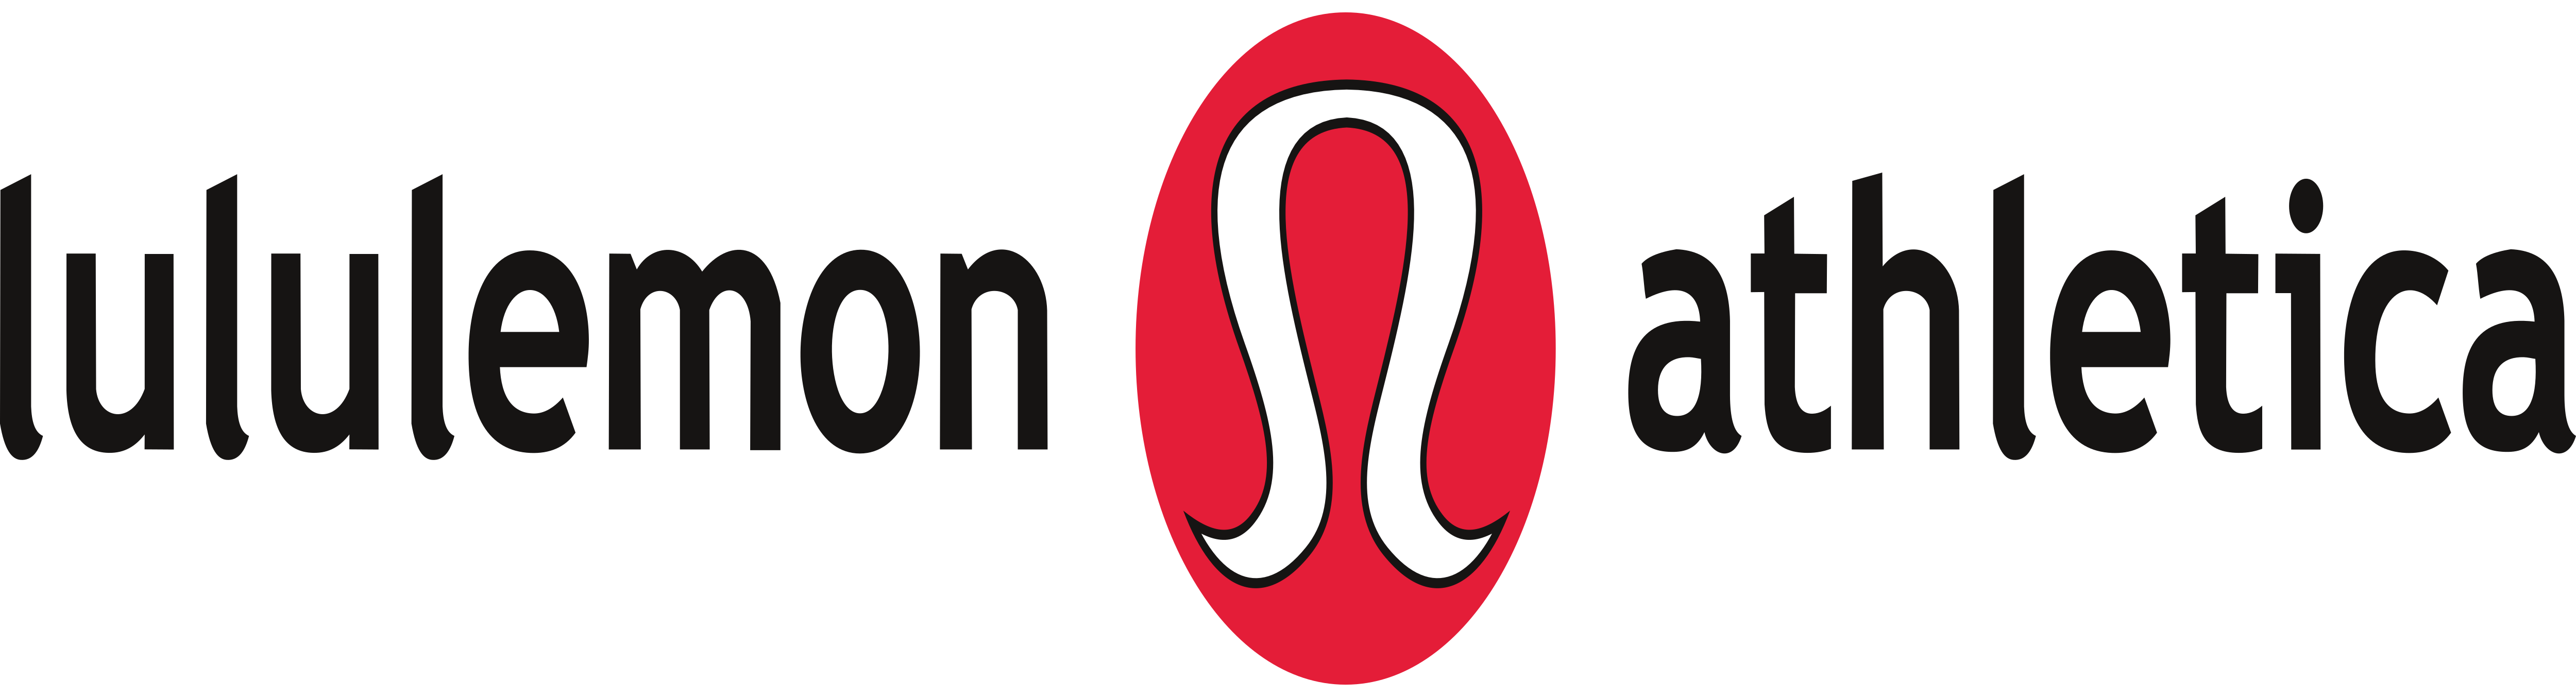 Lululemon Athletica Inc. Company Canada Travel  International Society of  Precision Agriculture